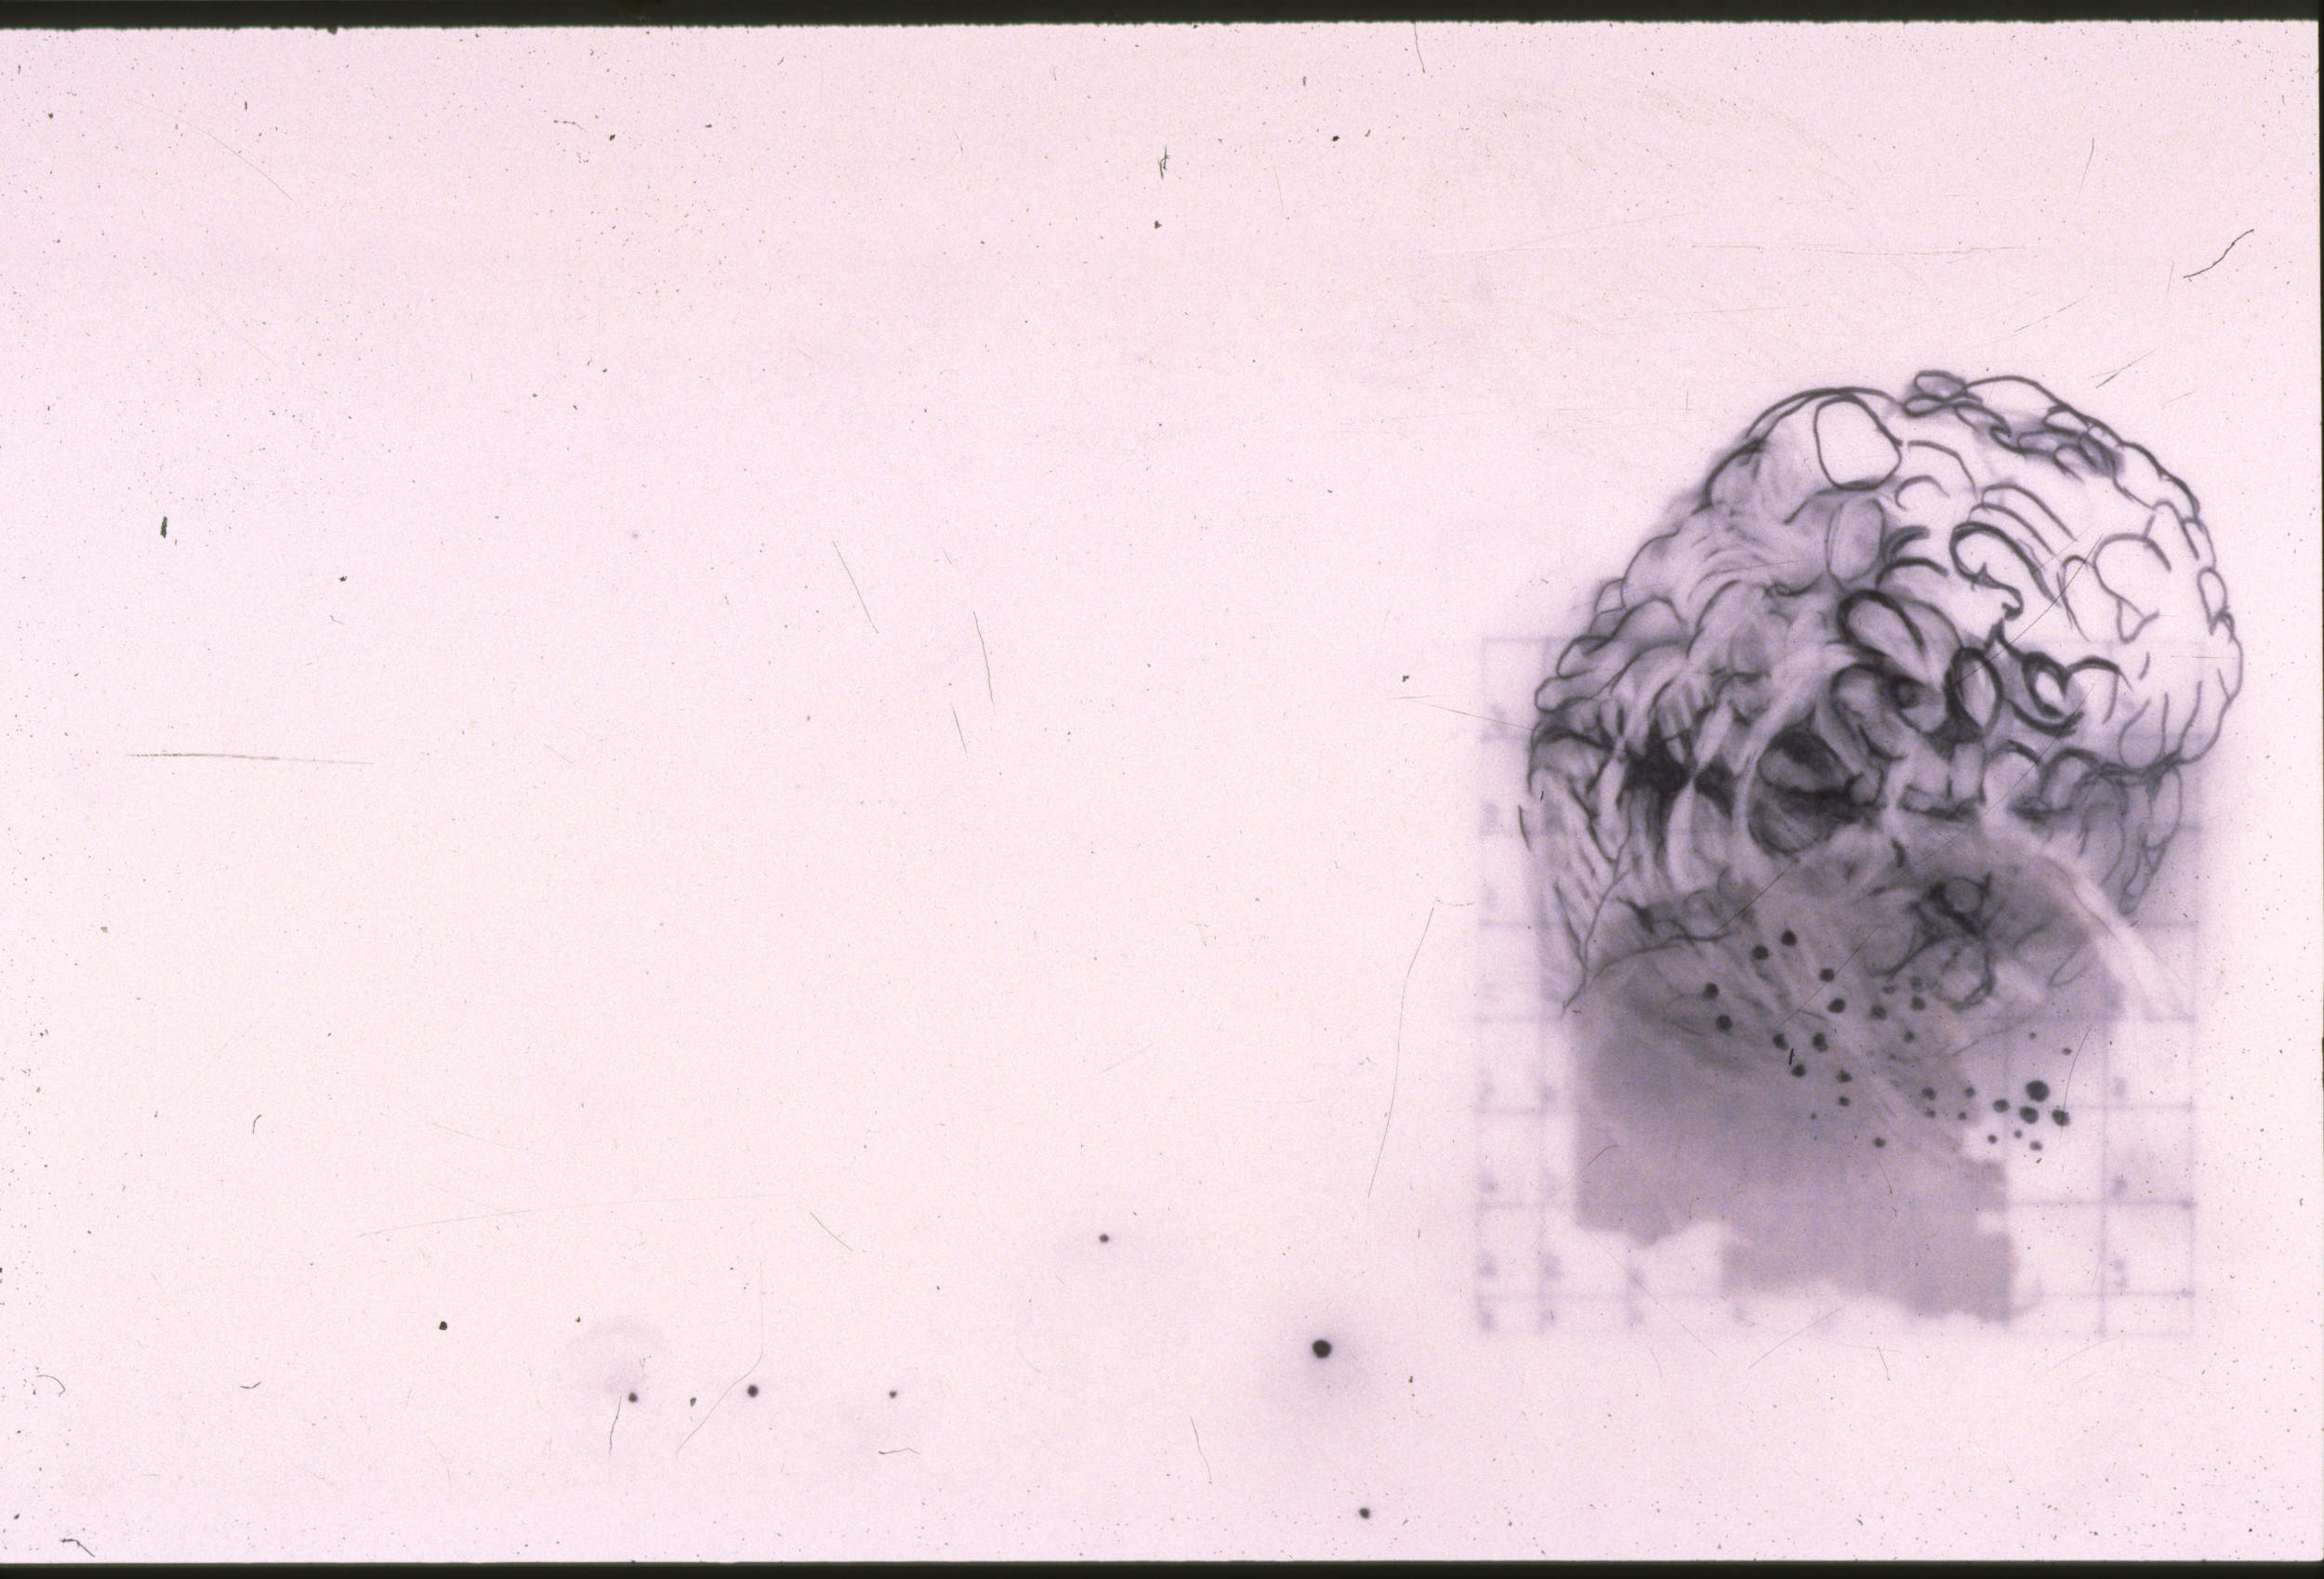 Mapping of Memories Series No. 3, graphite on Mylar, 9 x 12 inches, 2001